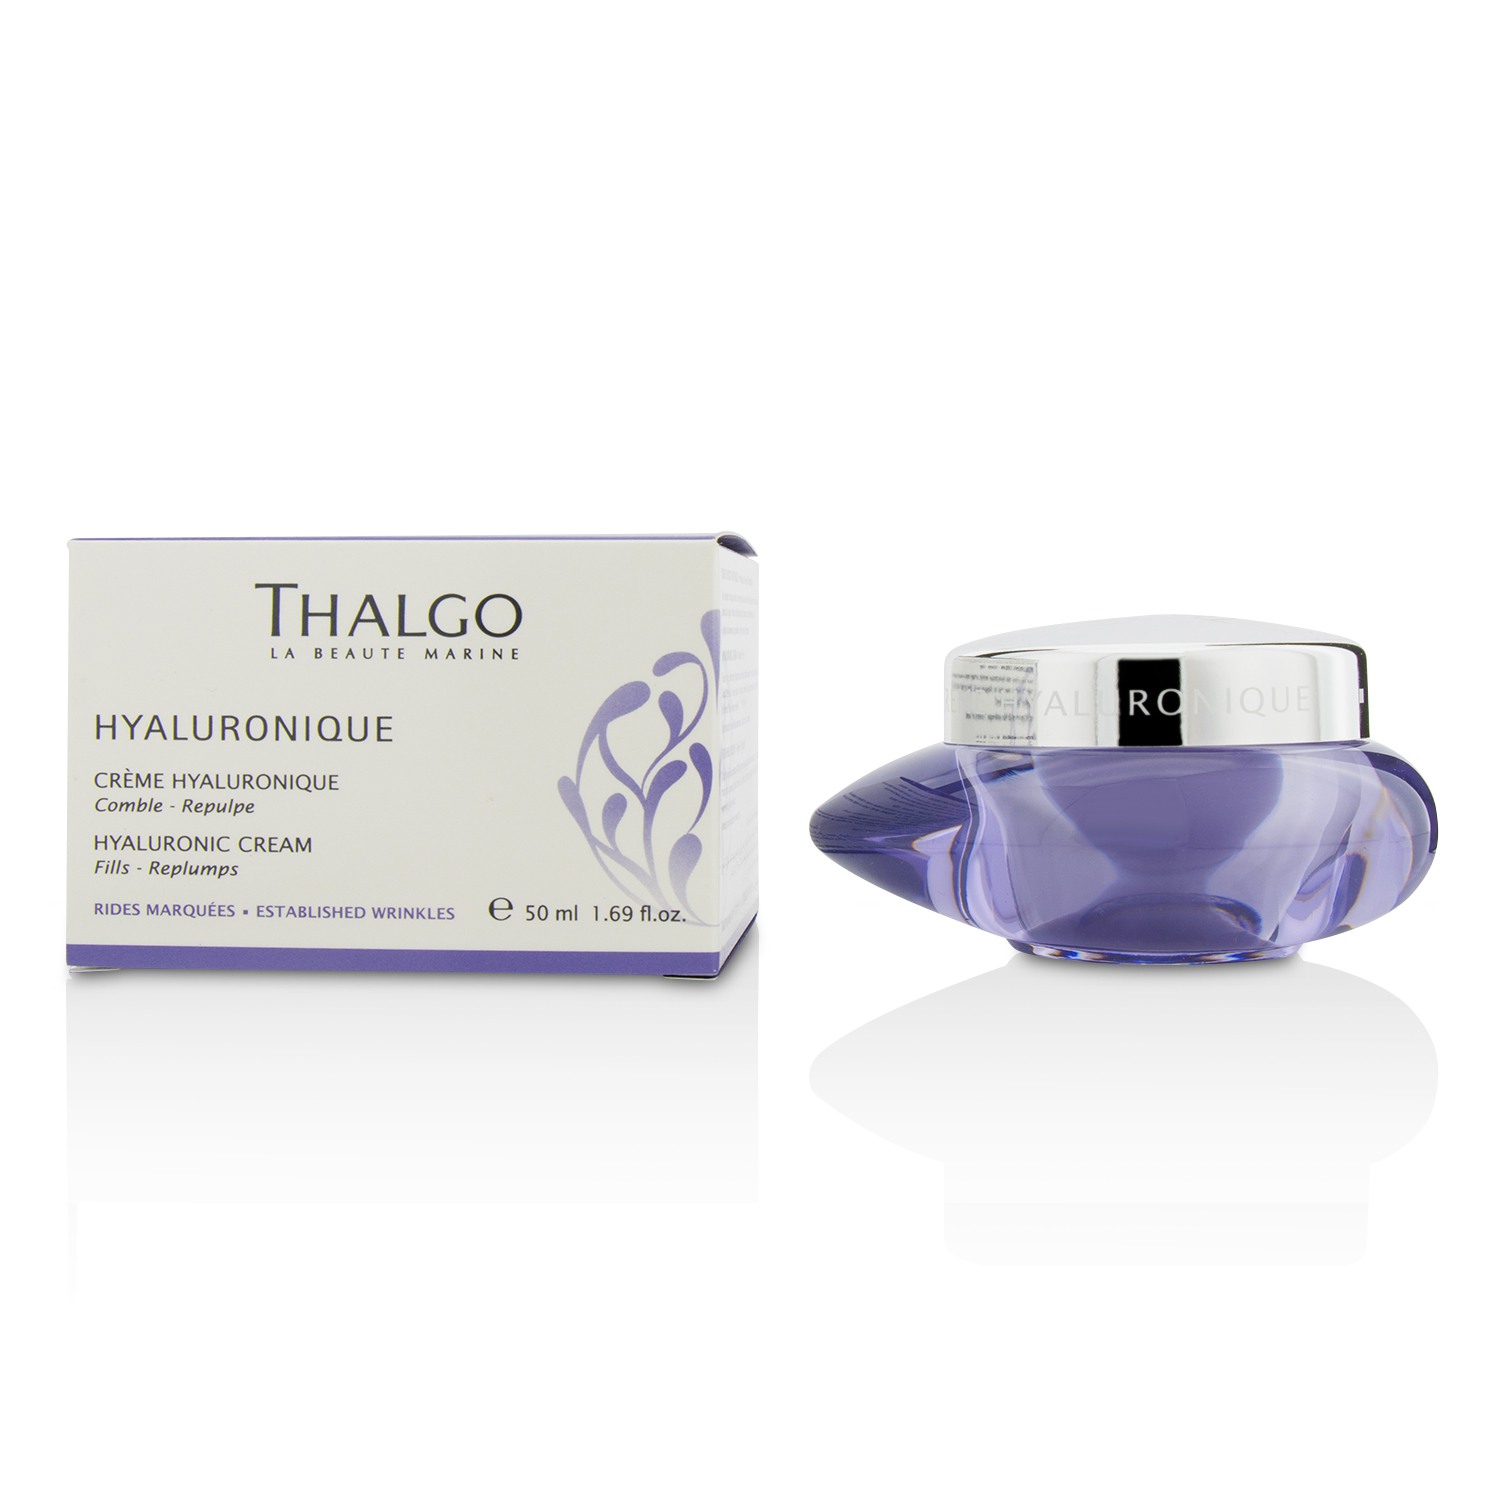 Hyaluronique Hyaluronic Cream Thalgo Image